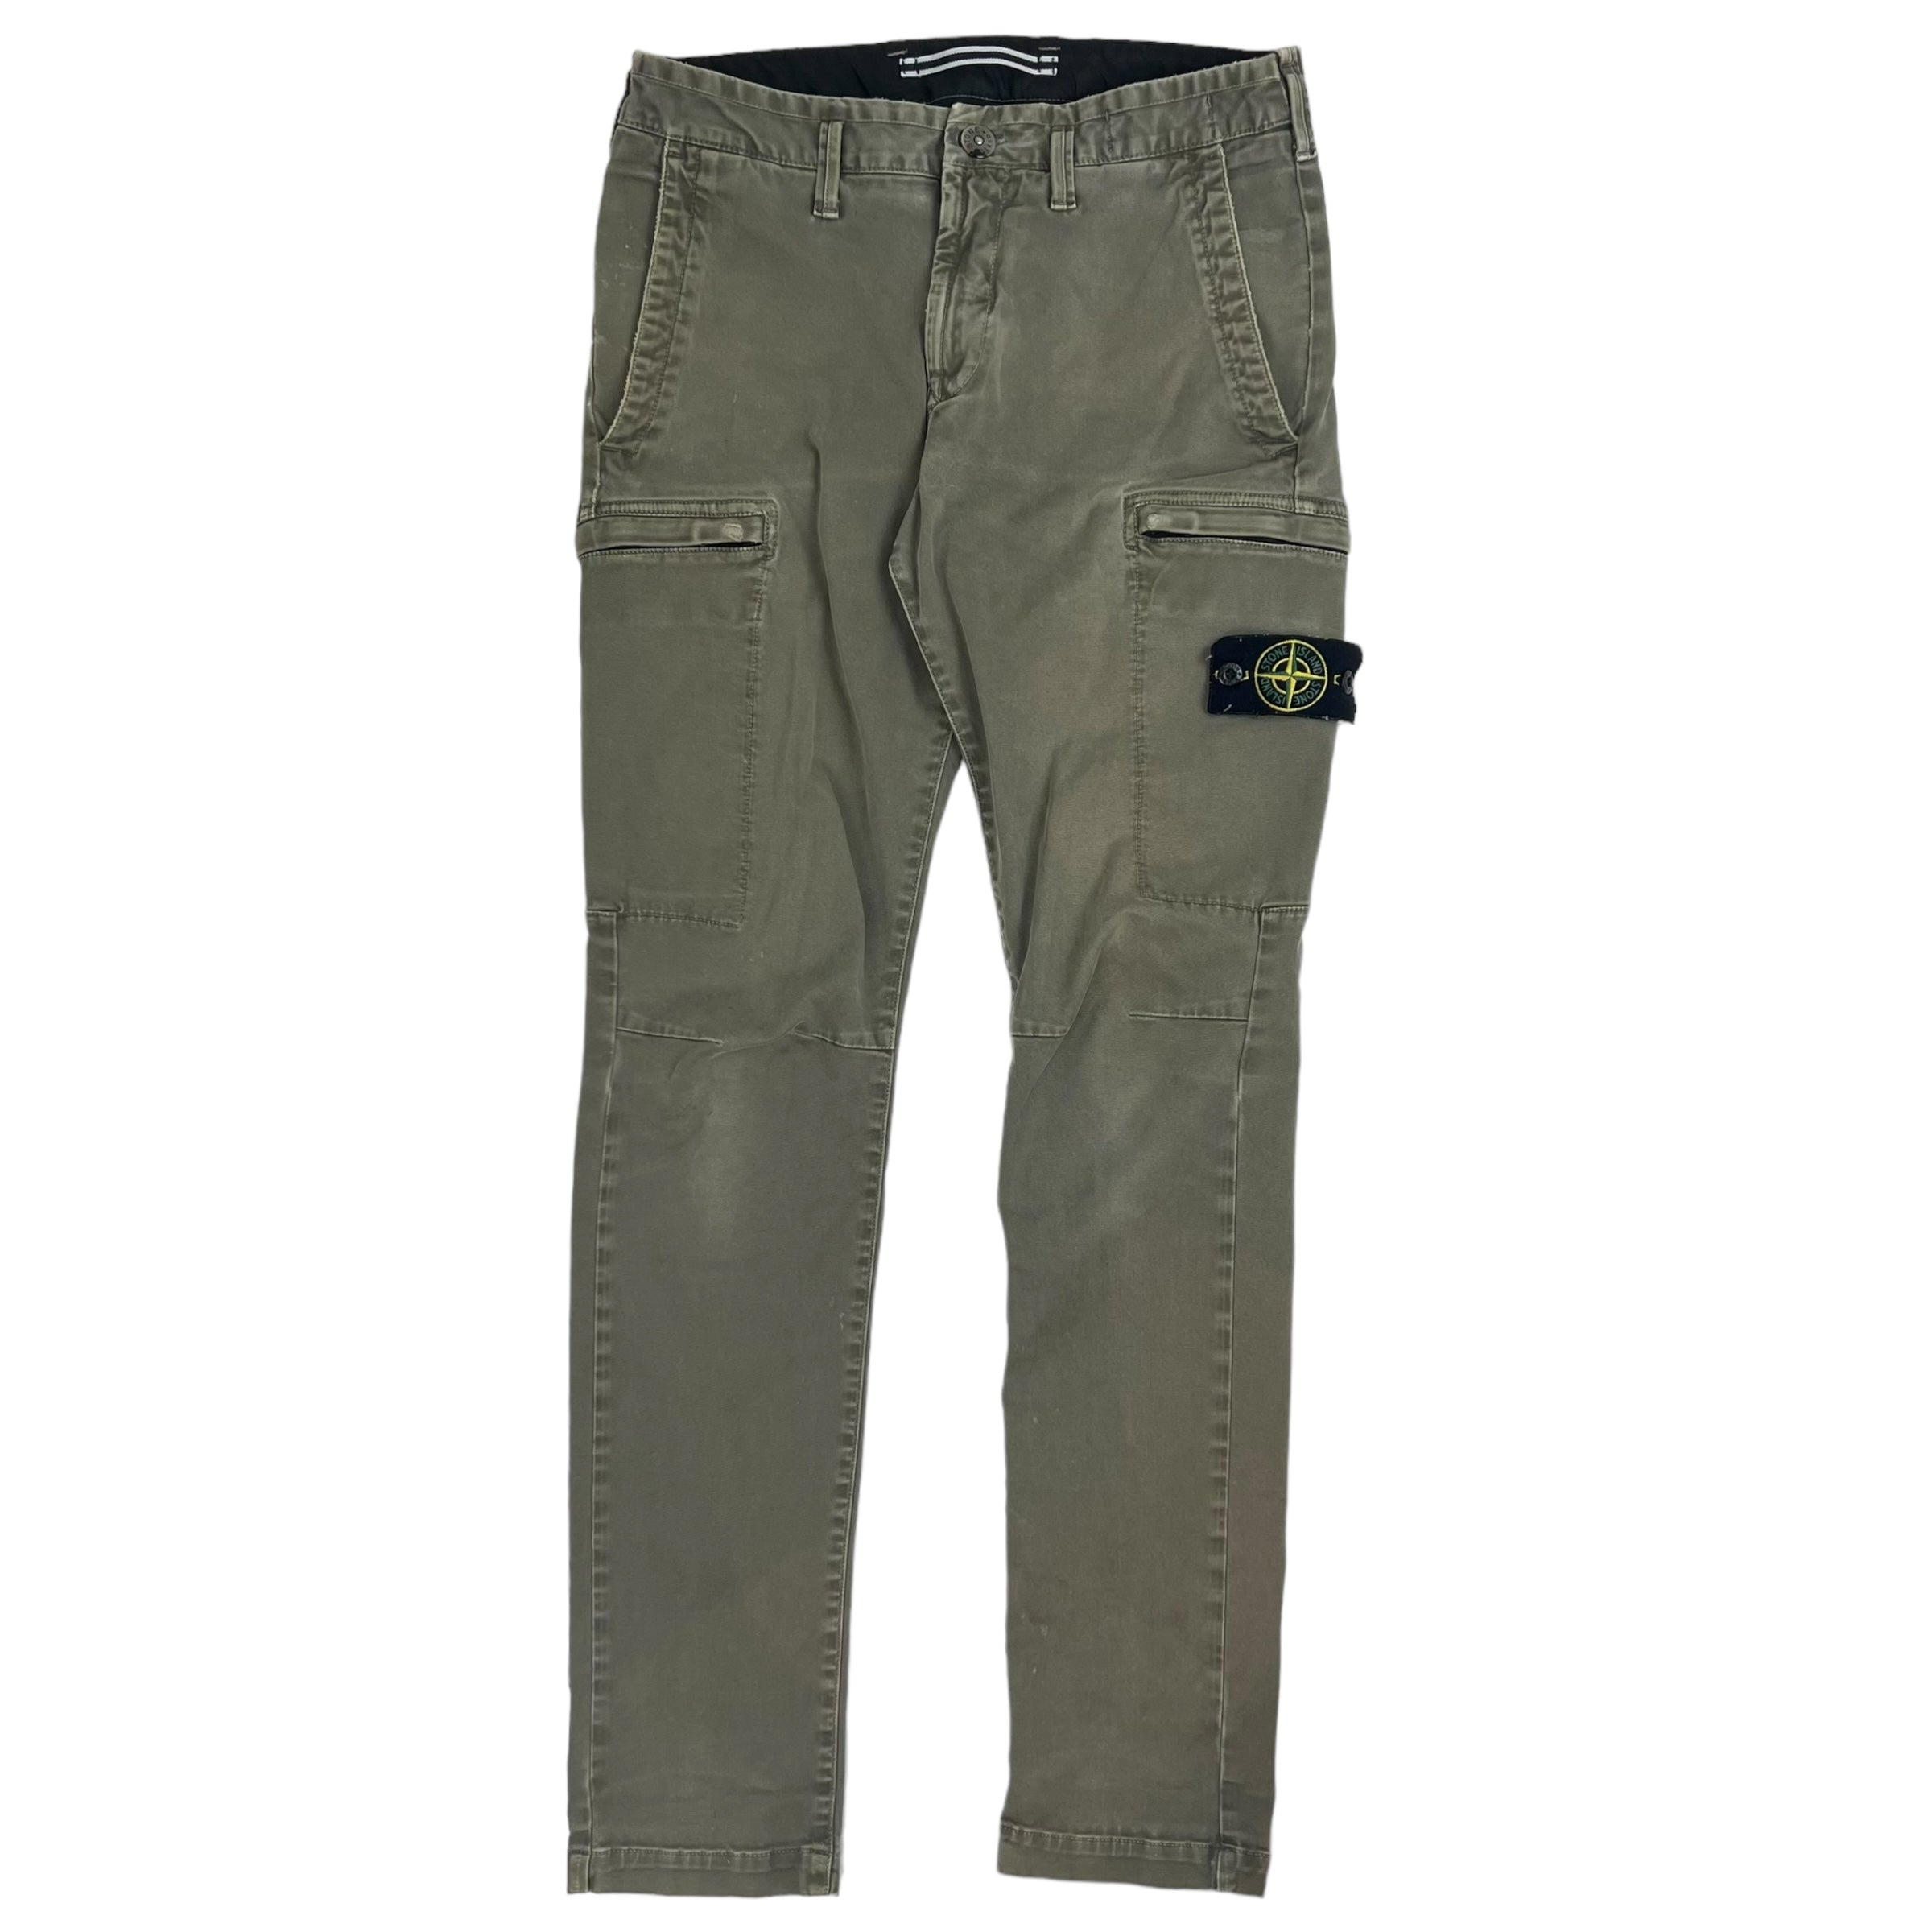 Stone Island Slim-Fit Cargo Pants - Olive Cargo Trousers